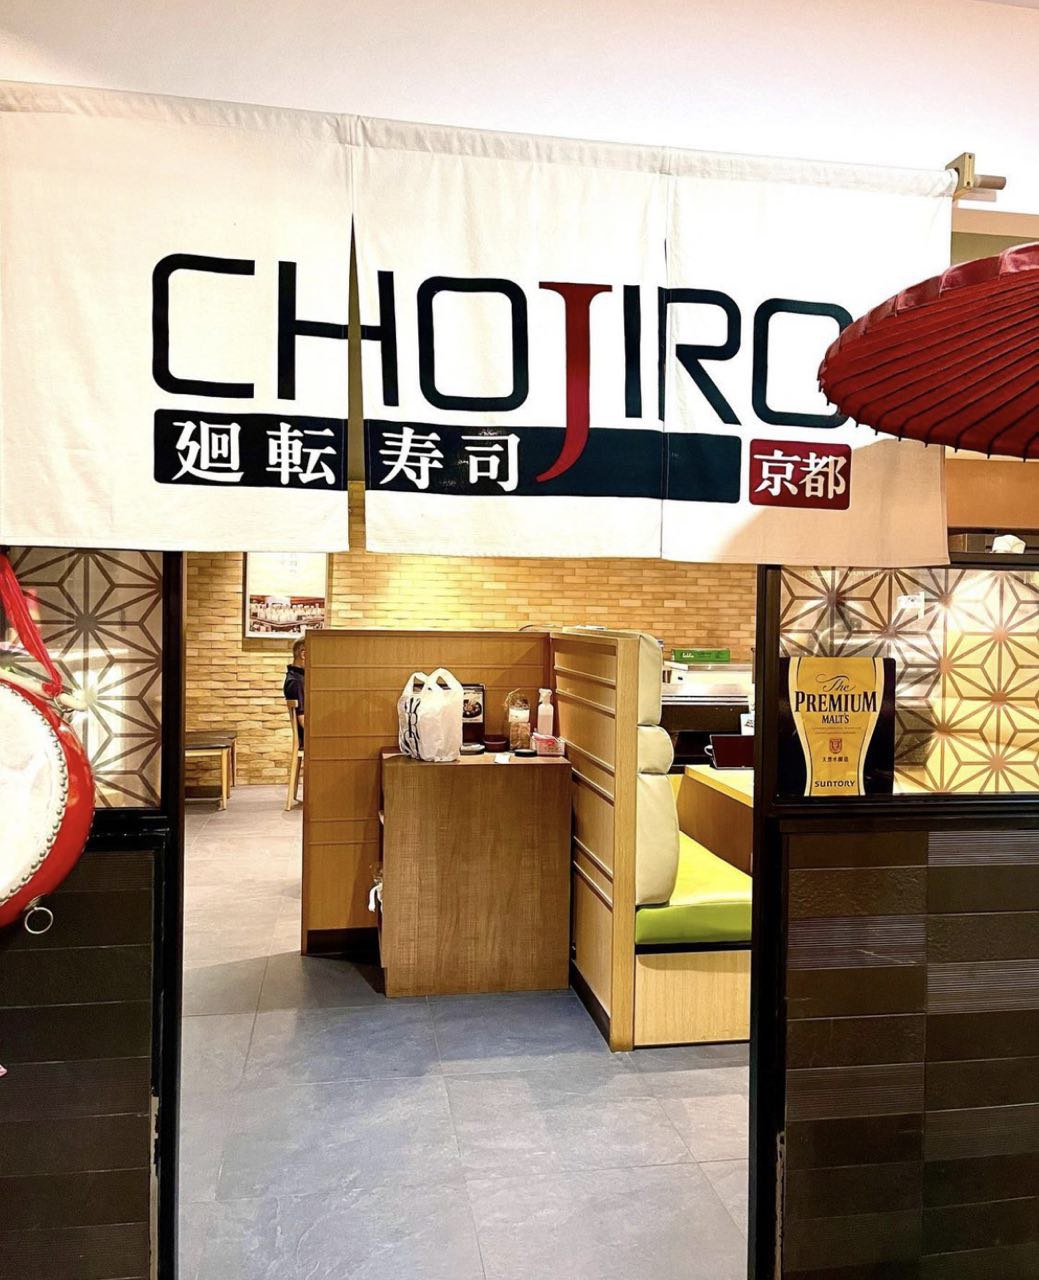 CHOJIRO'S FIRST OUTLET OUTSIDE JAPAN WITH TRADITIONAL STEAMED SUSHI – Shout